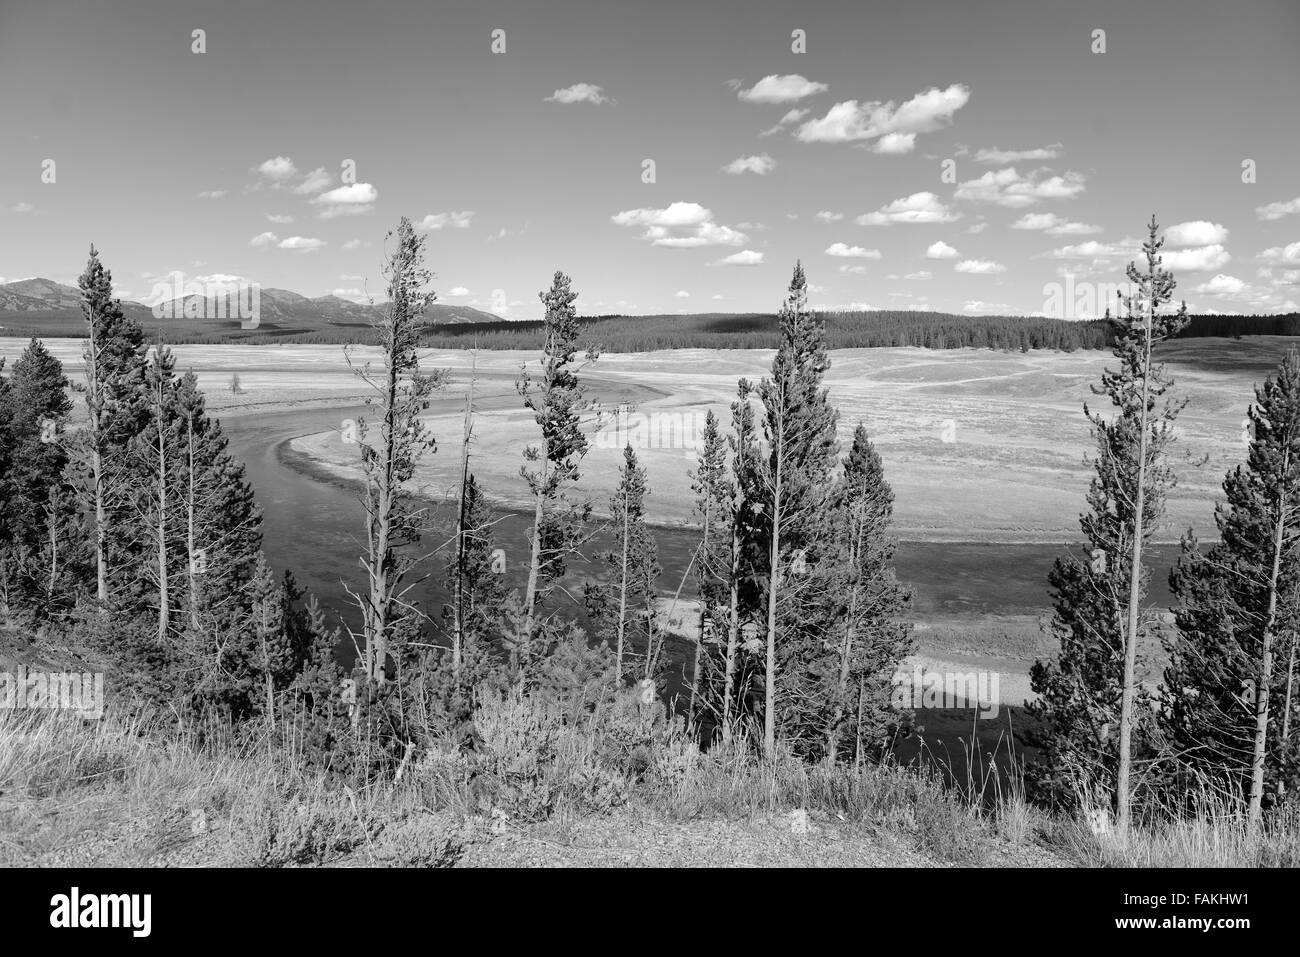 Le Parc National de Yellowstone, Wyoming, USA Banque D'Images